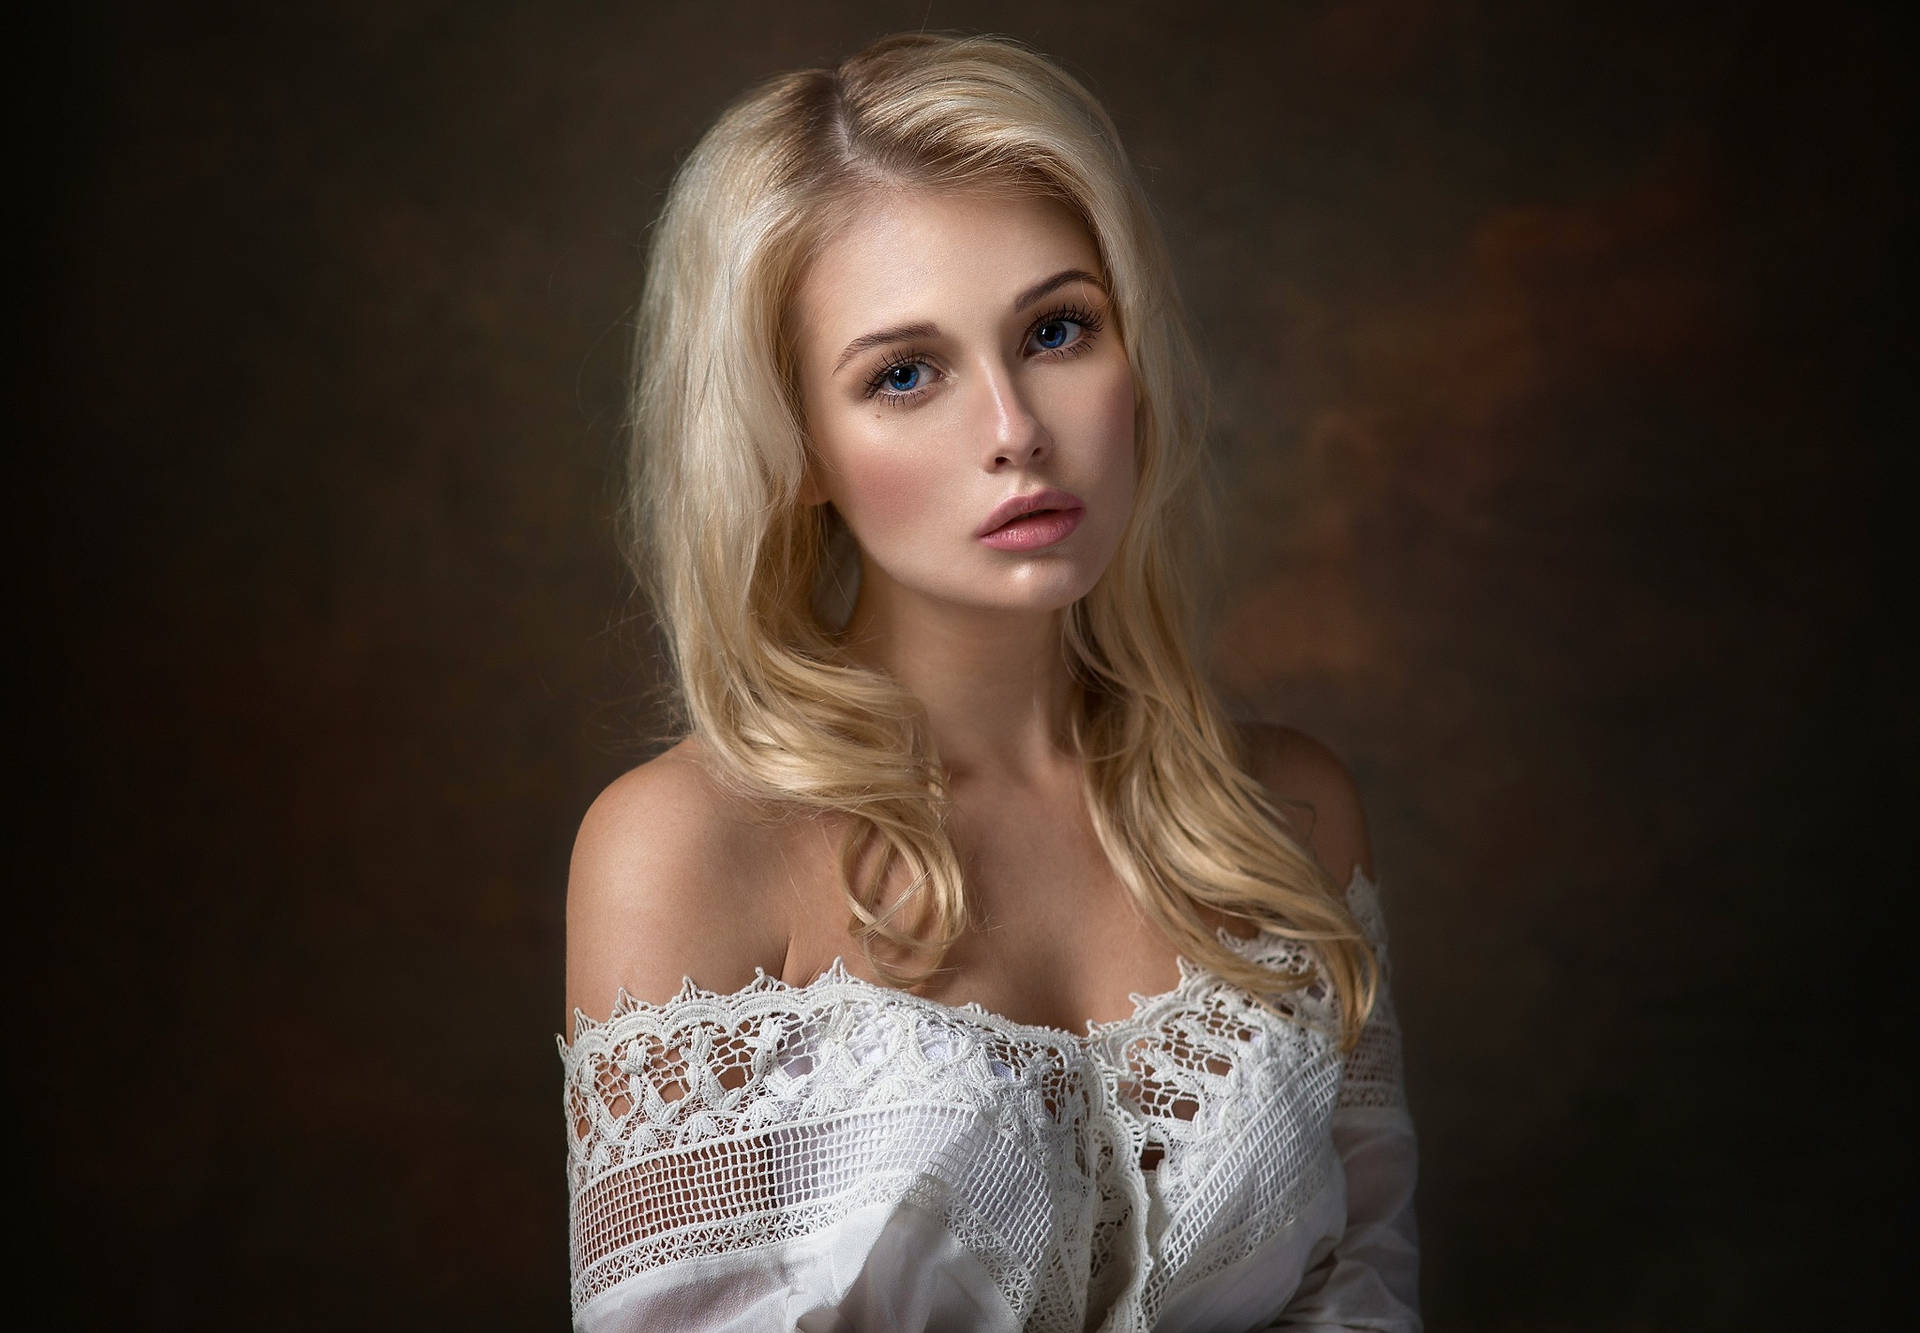 Blonde Female Model Painting Pouted Wallpaper